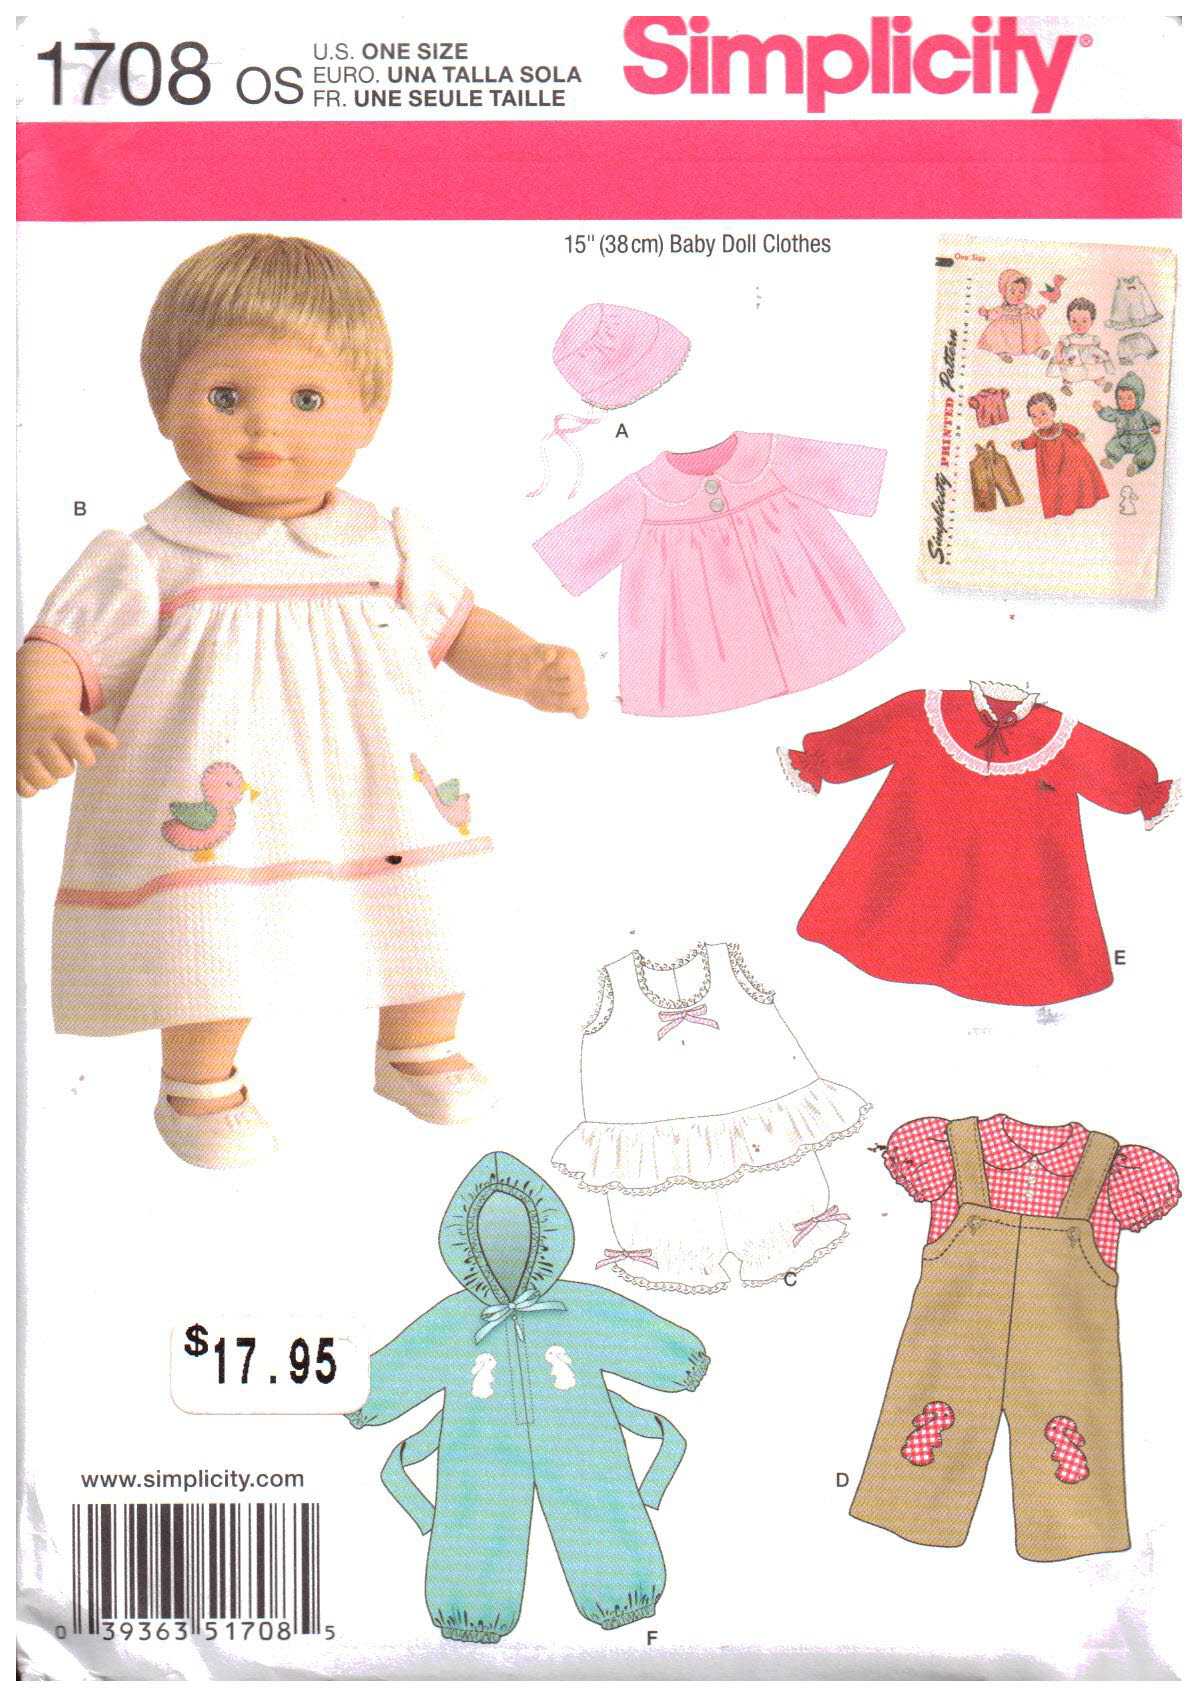 Simplicity 1708 Doll Clothes Size: 15